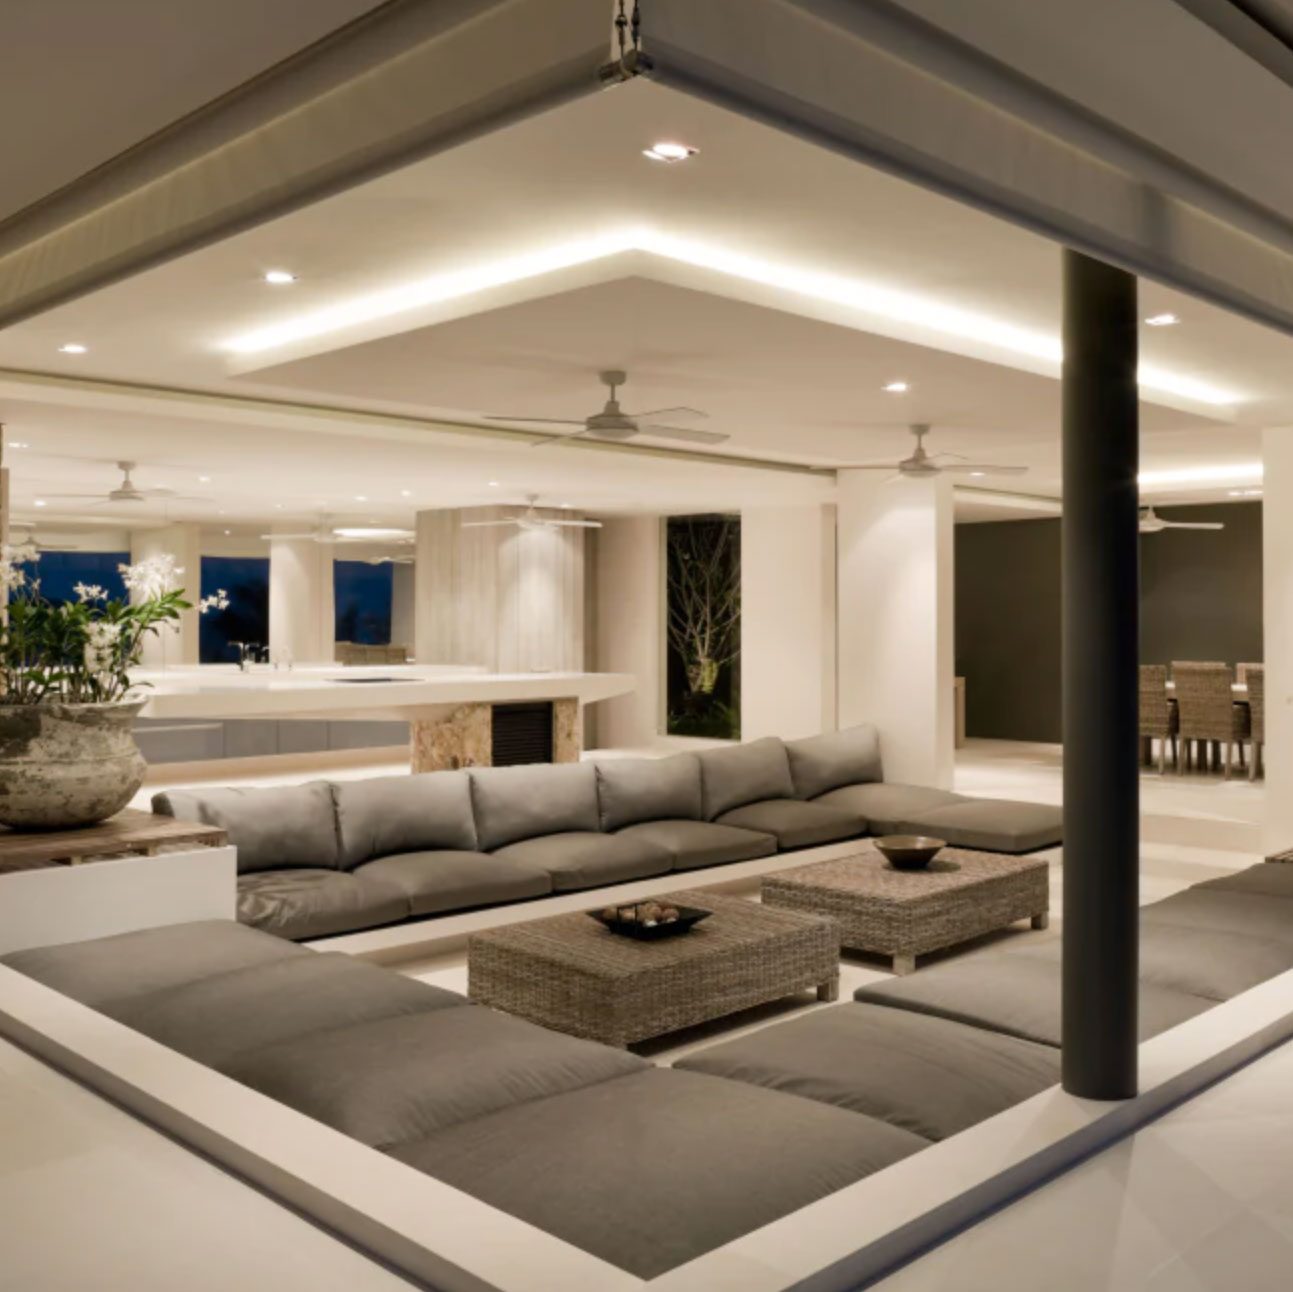 10 Recessed Lights Buy for Your Home The Family Handyman